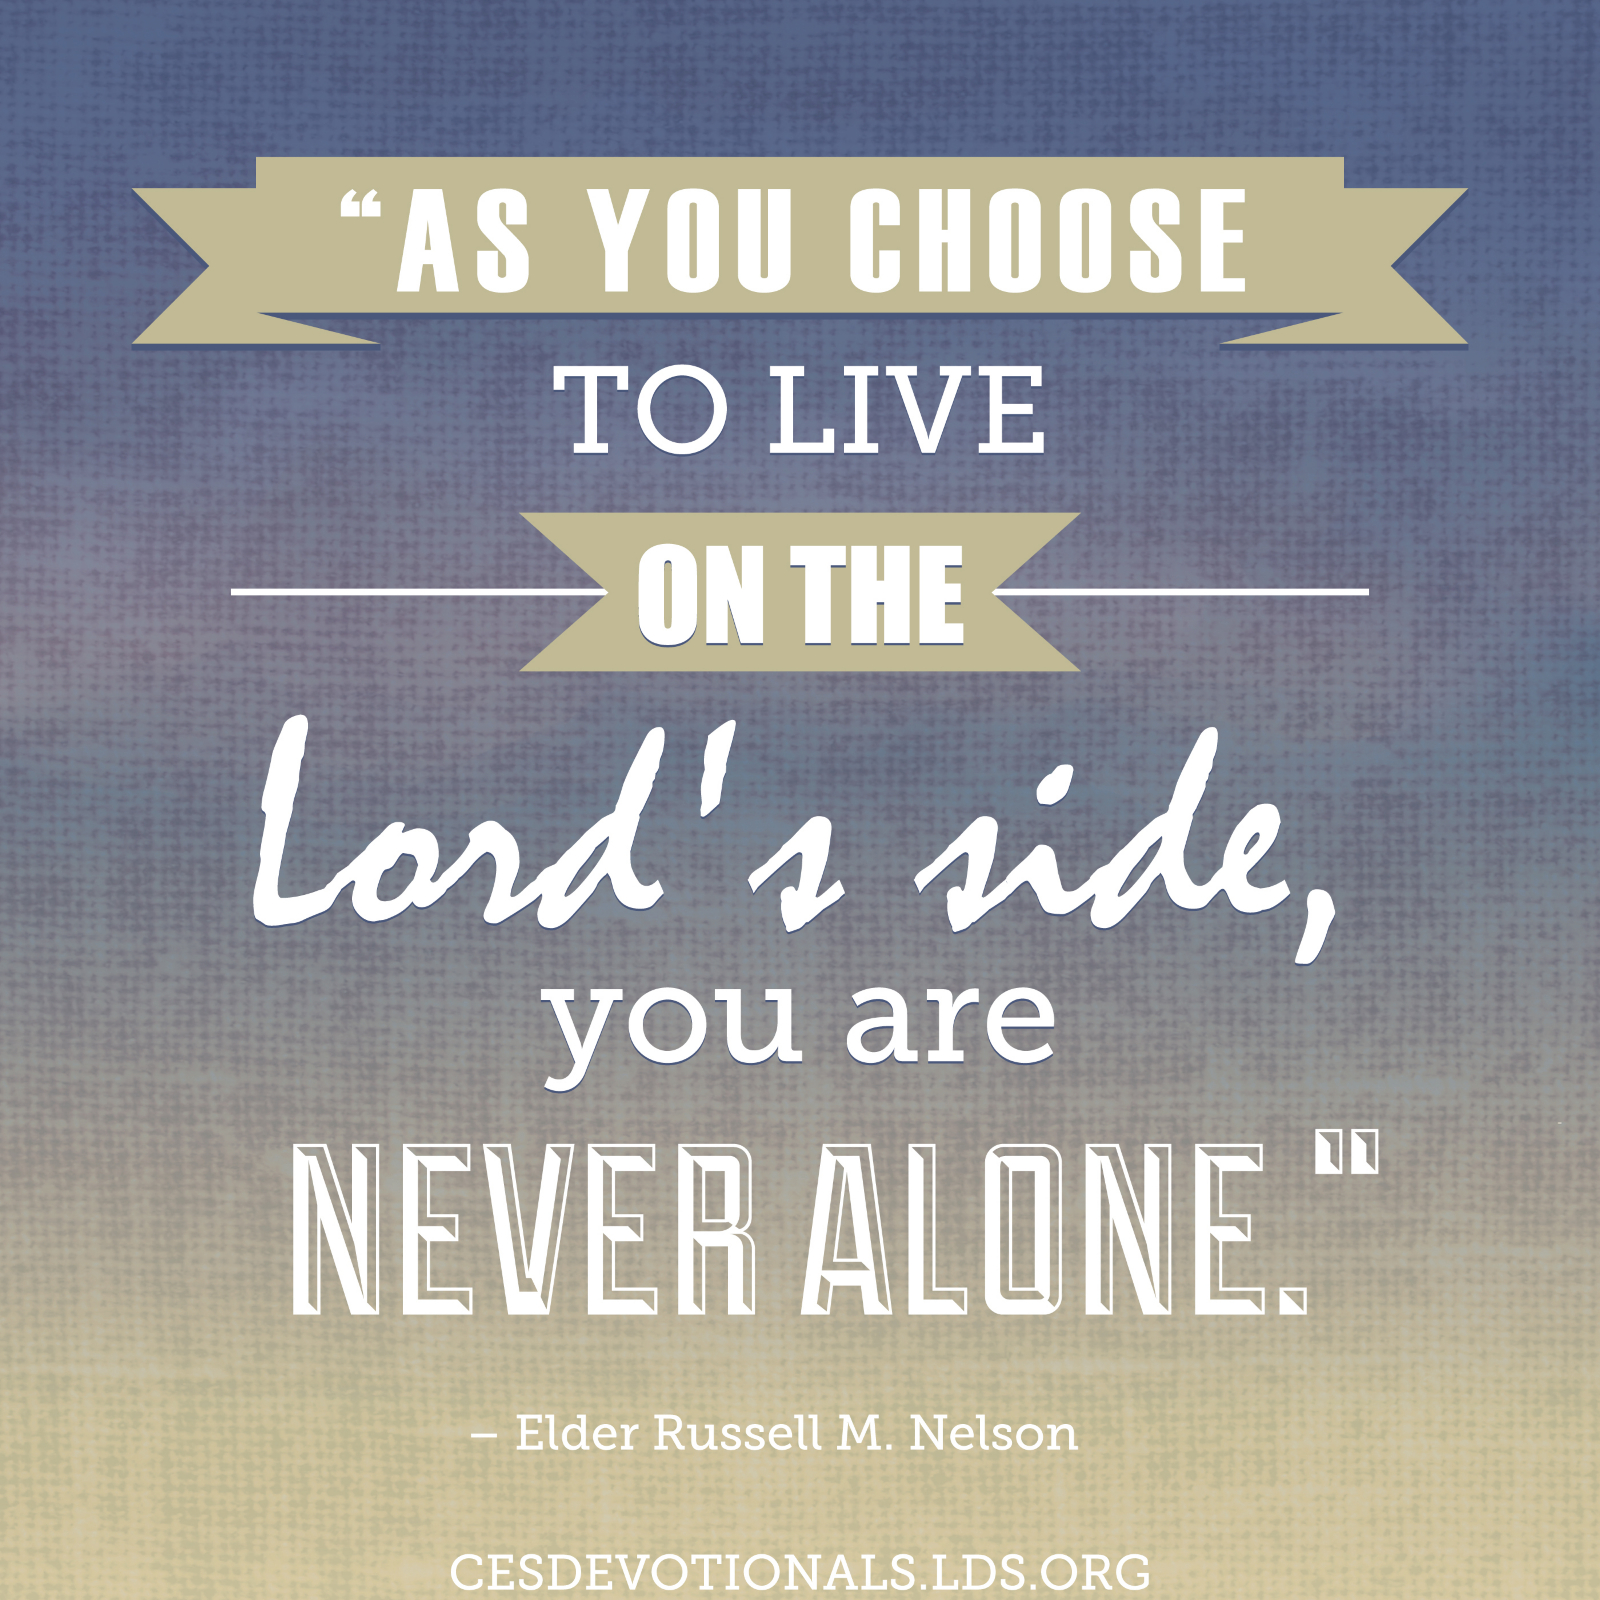 Quotes From President Nelson - HD Wallpaper 